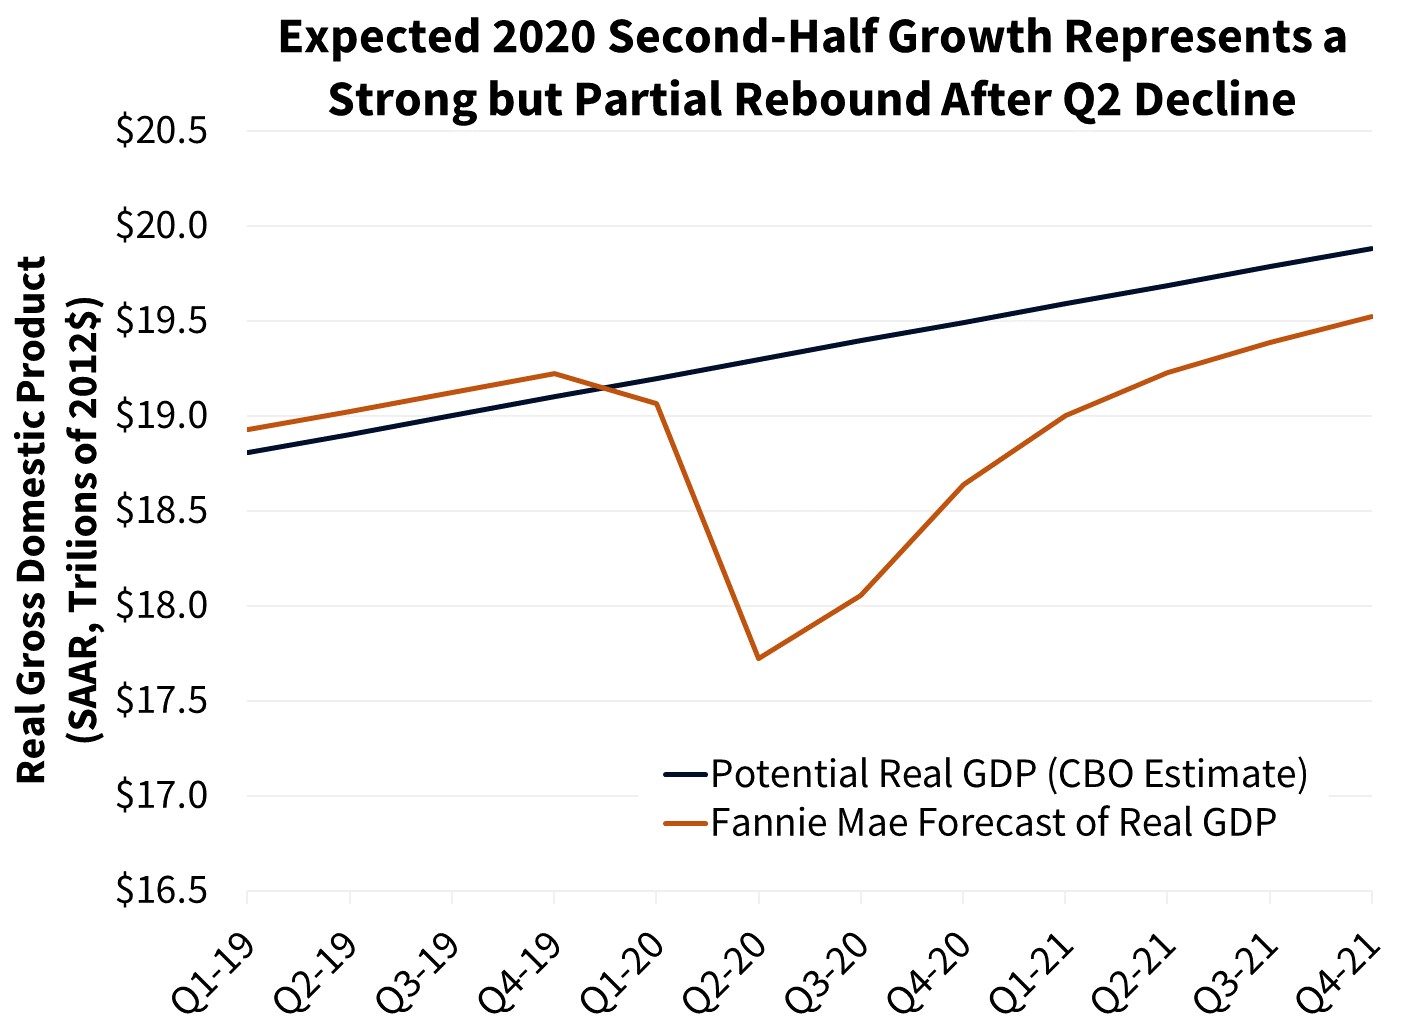  Expanded 2020 Second Half Growth Represents a Strong but Partial Rebound After Q2 Decline 